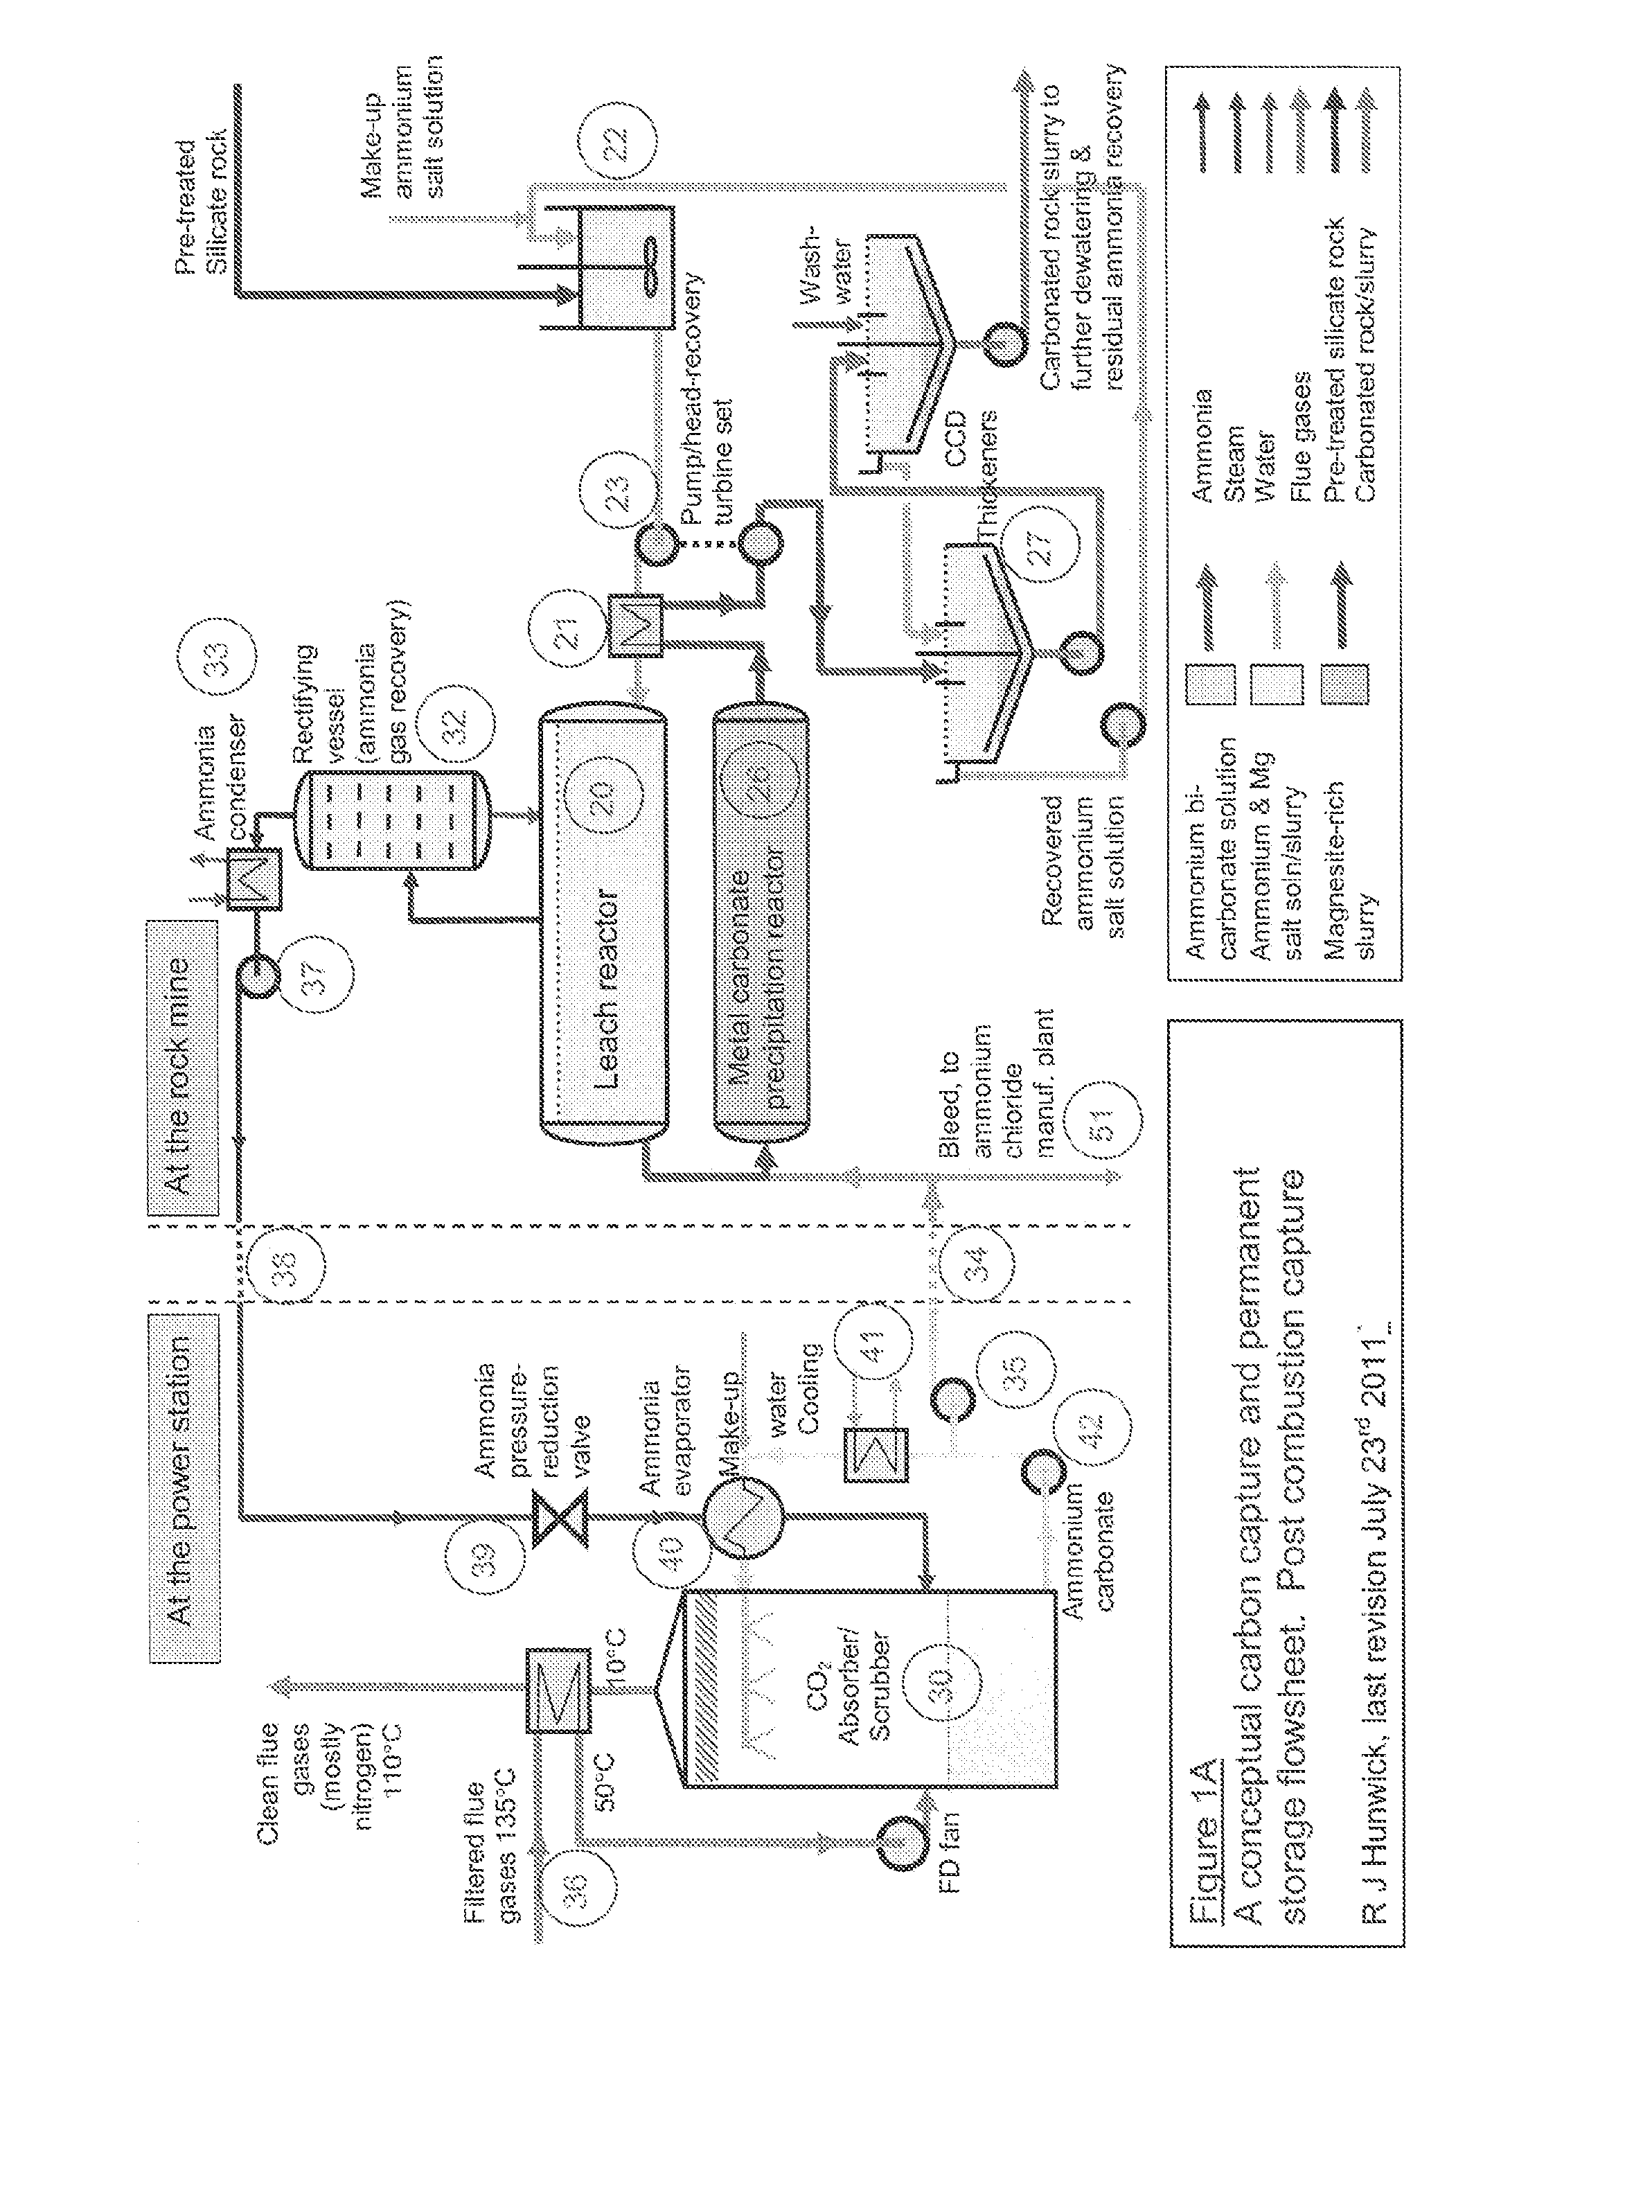 Process and system for capturing carbon dioxide from a gas stream